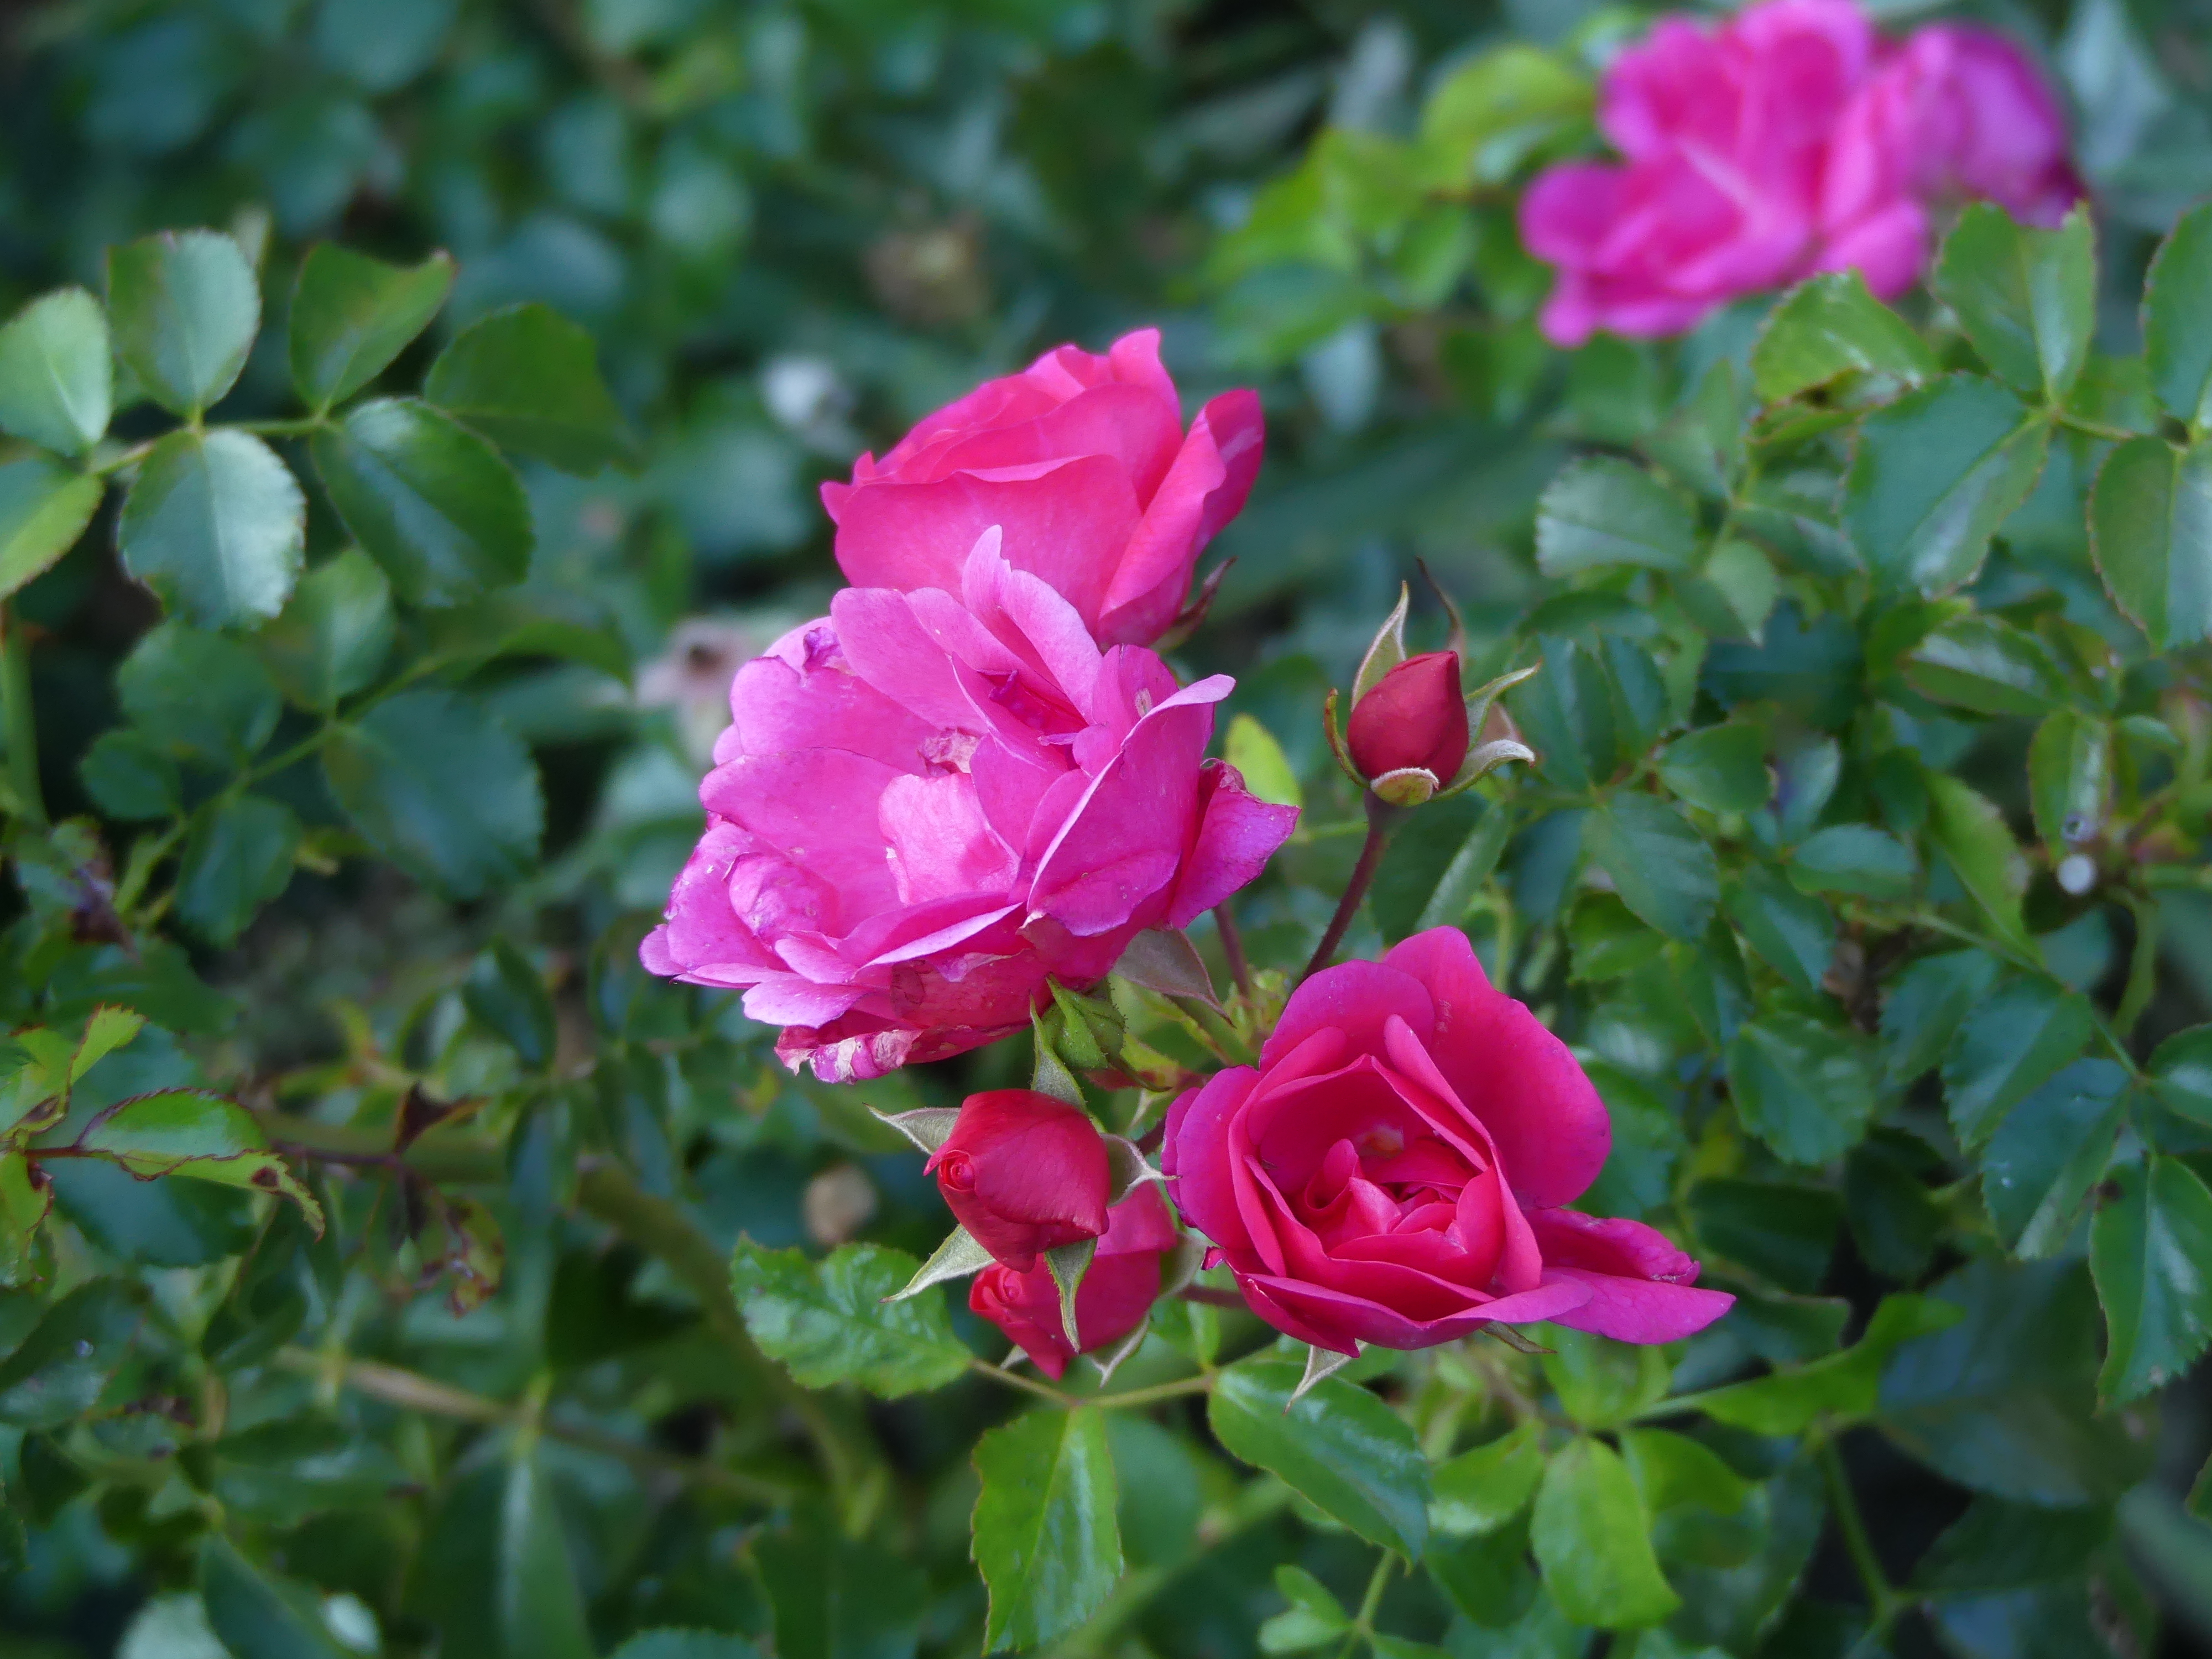 These roses were still blooming and in their glory last weekend. If we don’t have a hard freeze many roses will continue to bloom as late as Thanksgiving so hold off on pruning them back if they are budded.